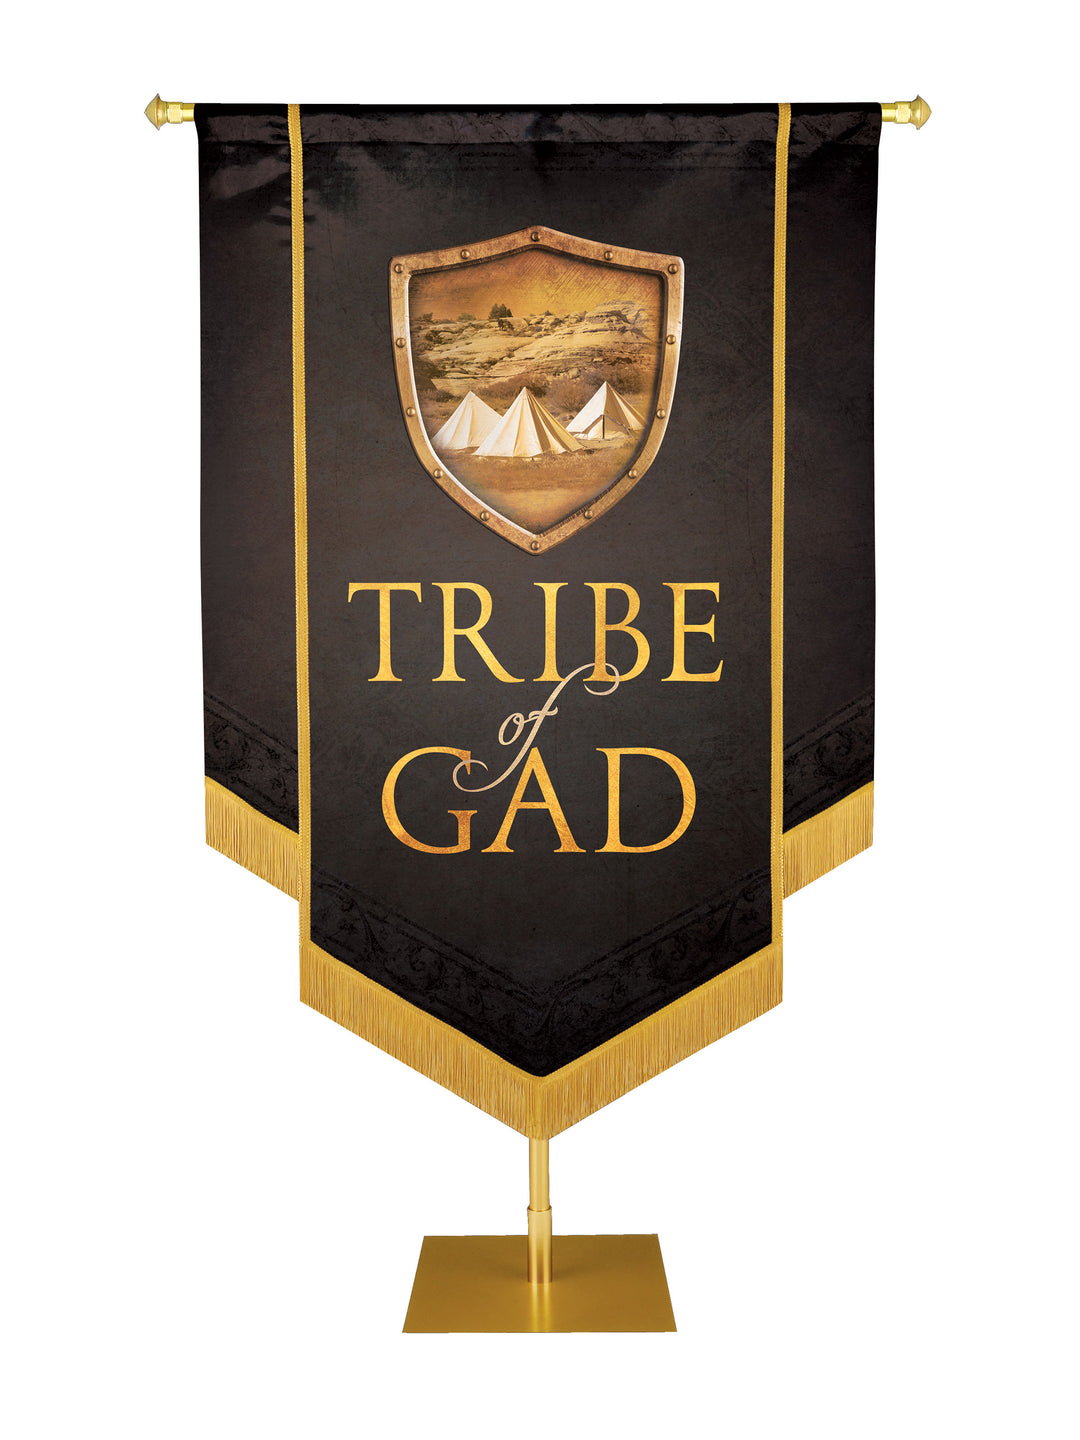 Tribe of Gad Embellished Banner - Handcrafted Banners - PraiseBanners